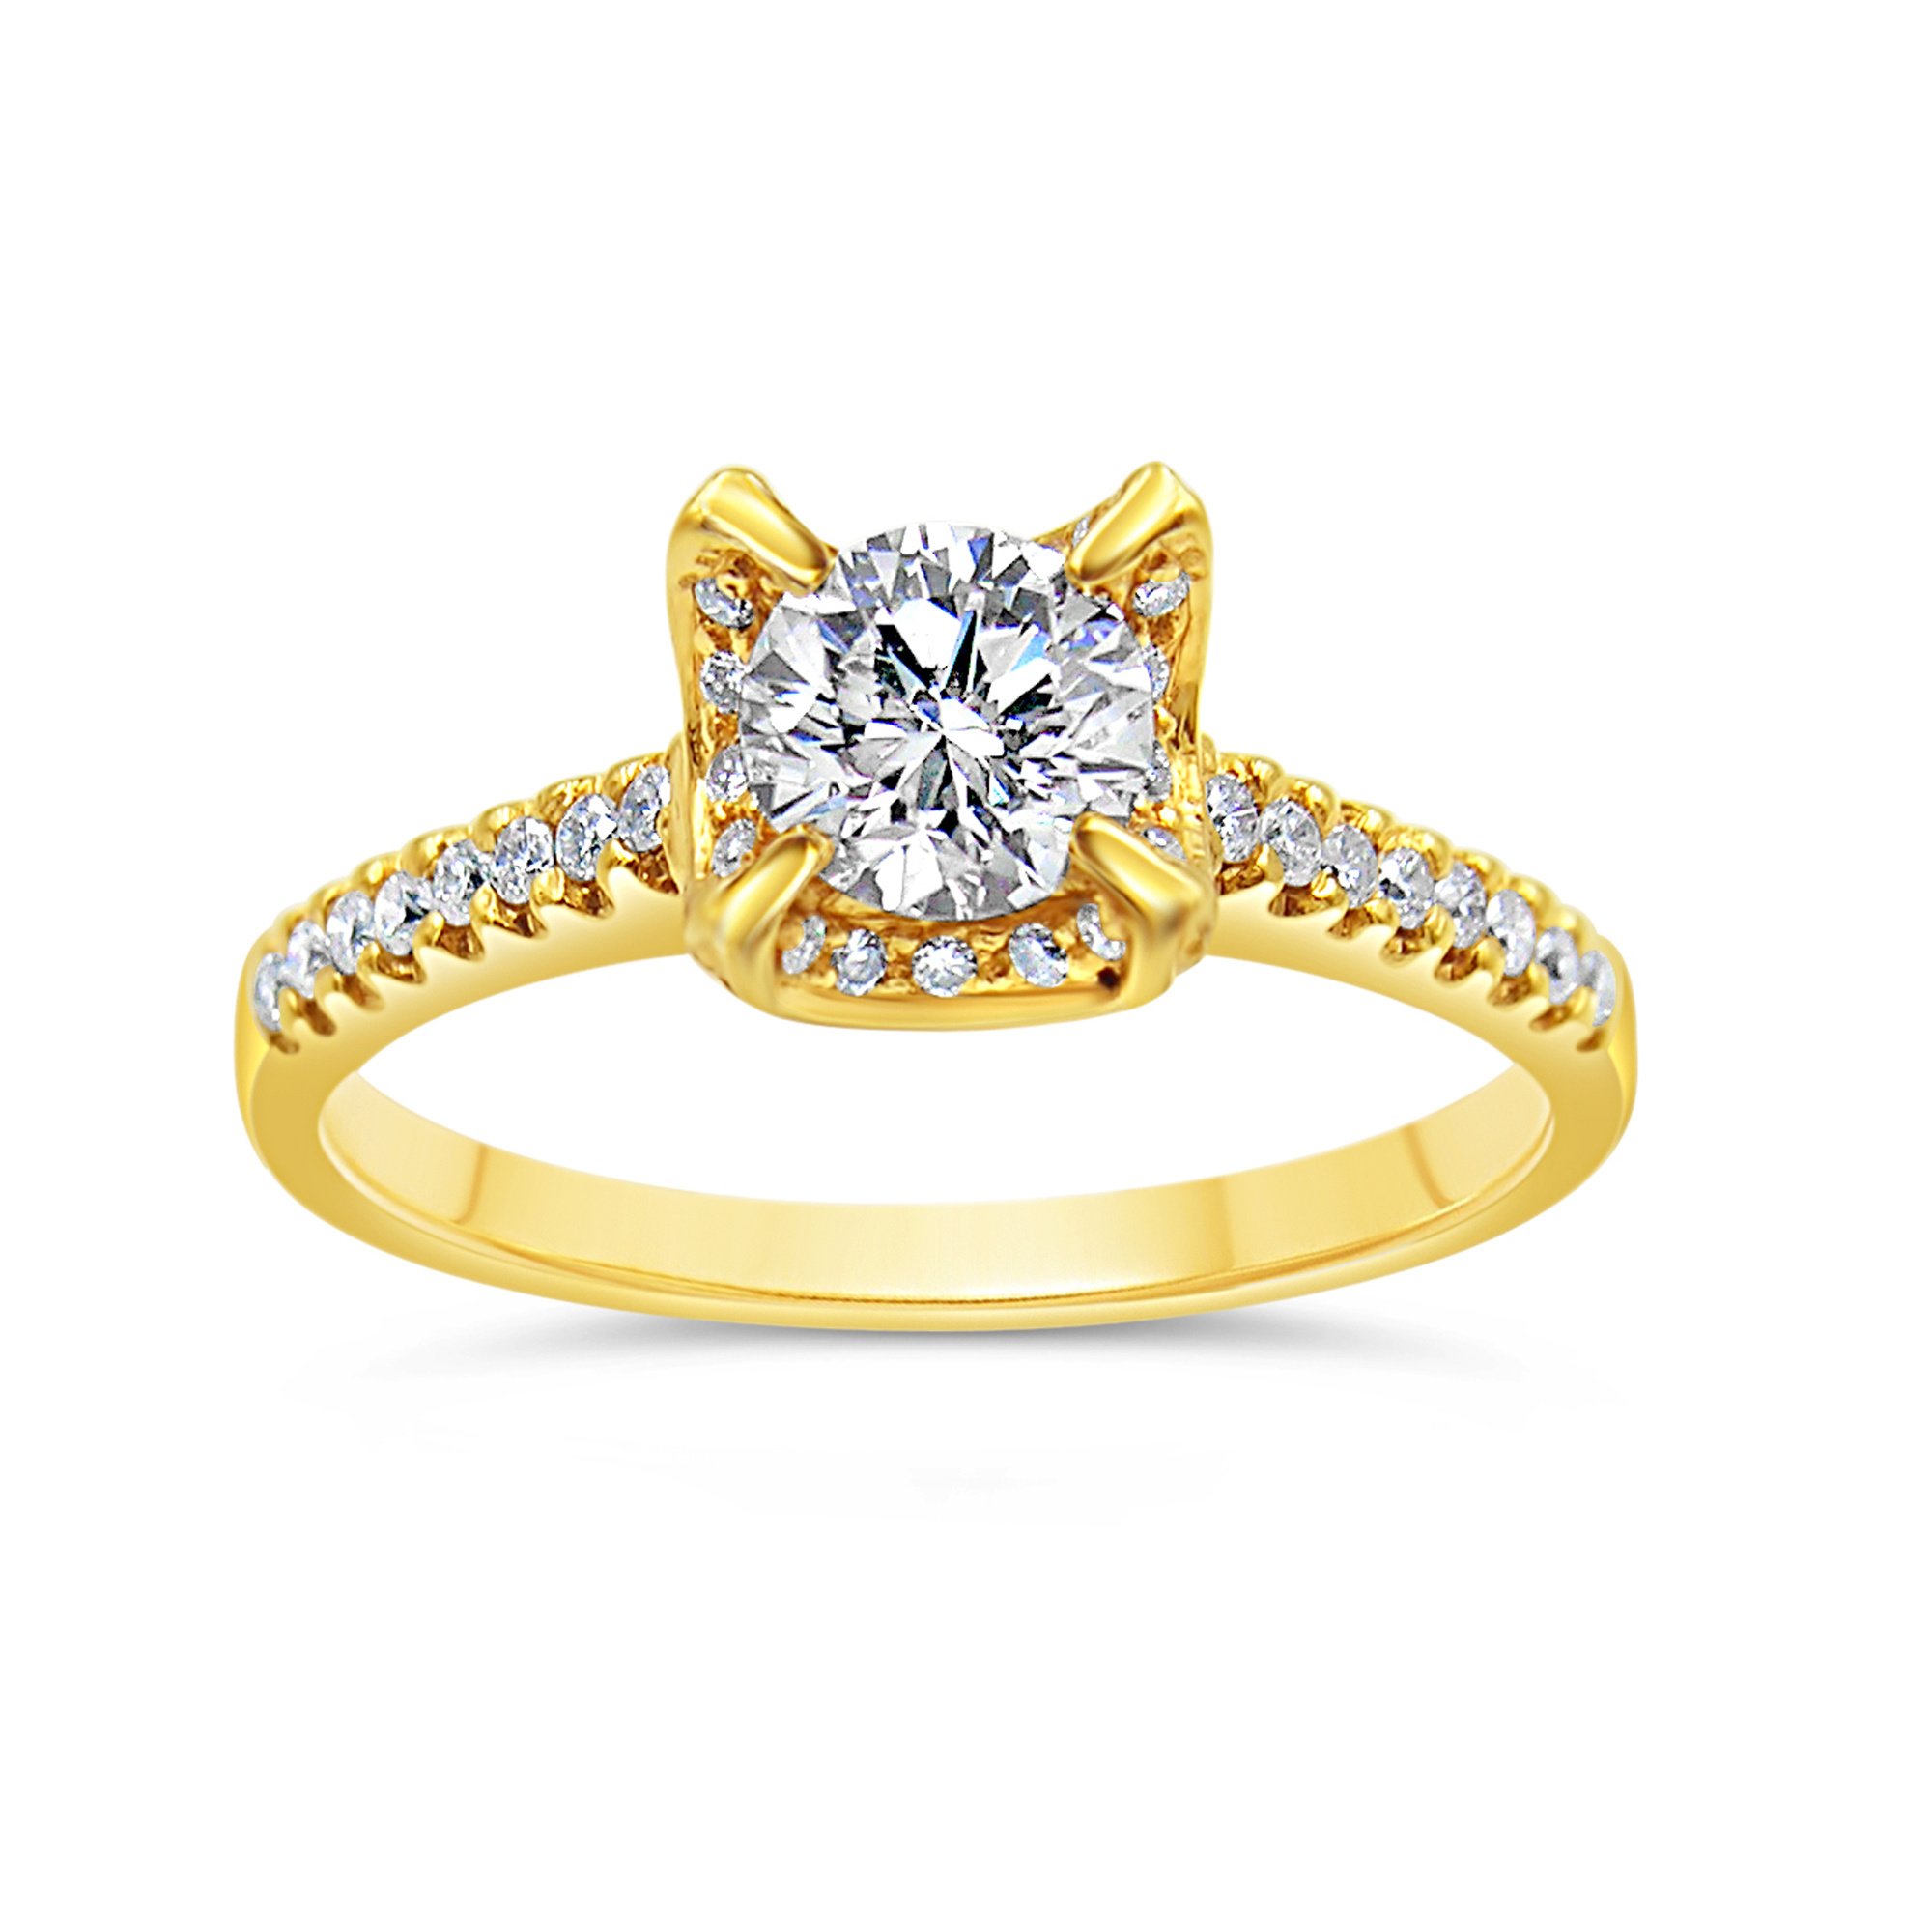 18kt yellow gold engagement ring with 0.87 ct diamonds